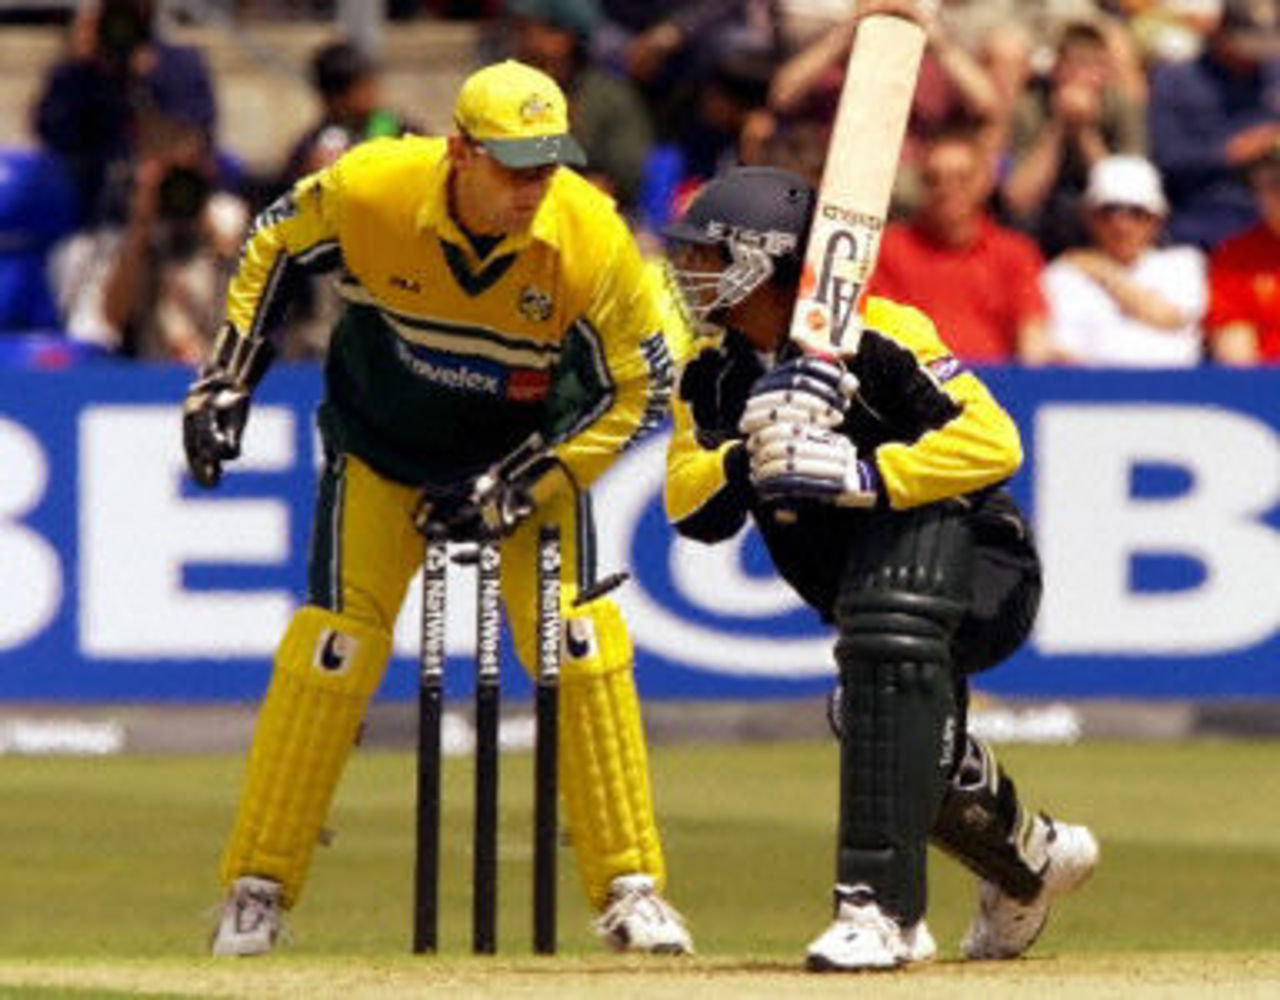 Rashid Latif keeps his ground as Adam Gilchrist takes the bails off, 2nd ODI at Cardiff, 9 June 2001.